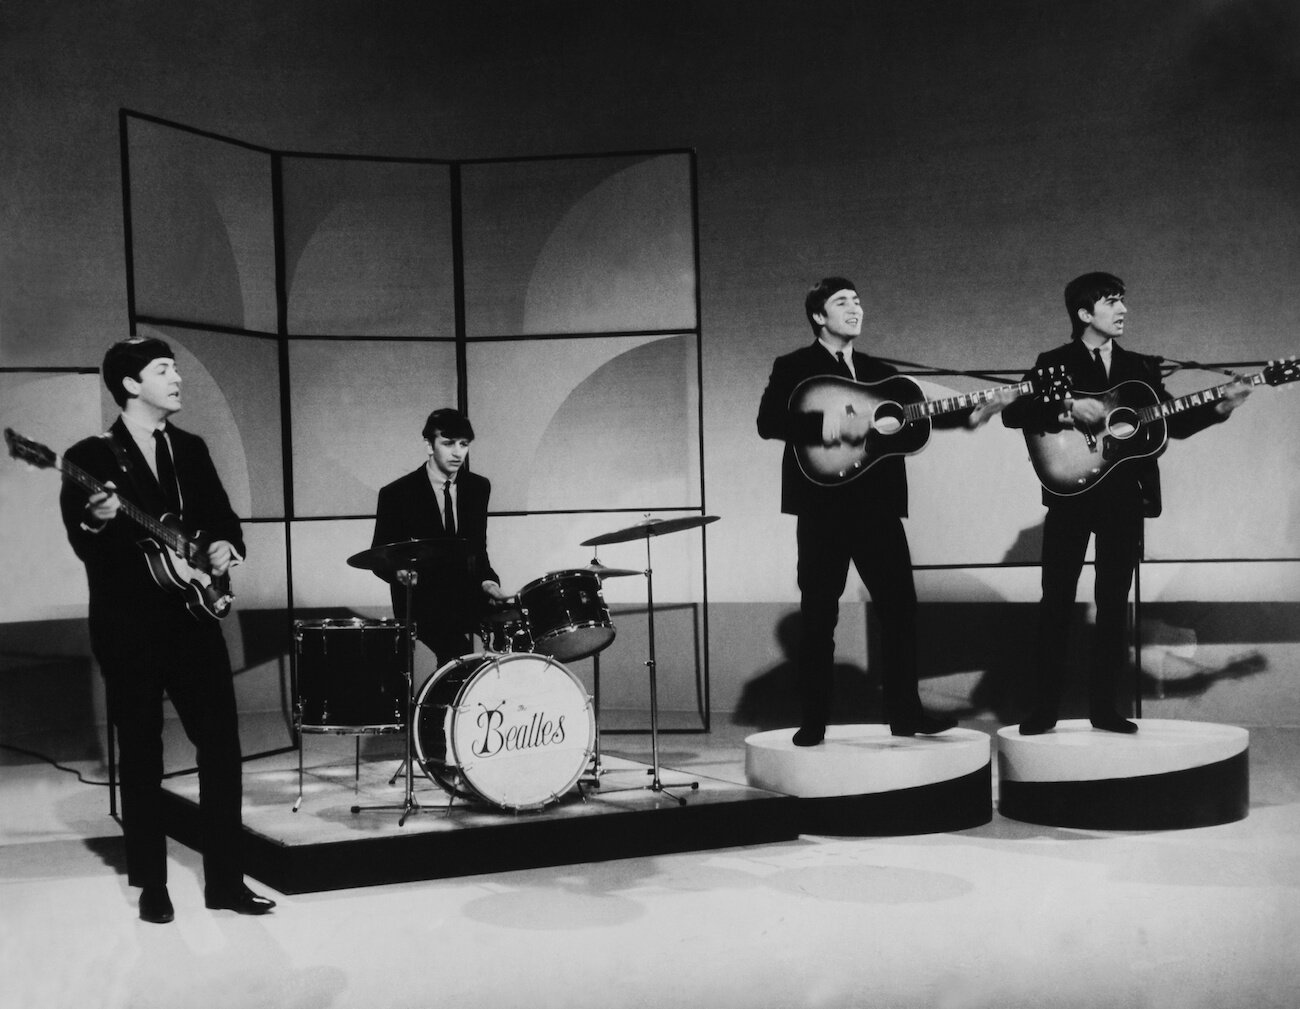 The Beatles performing on TV in the early 1960s.